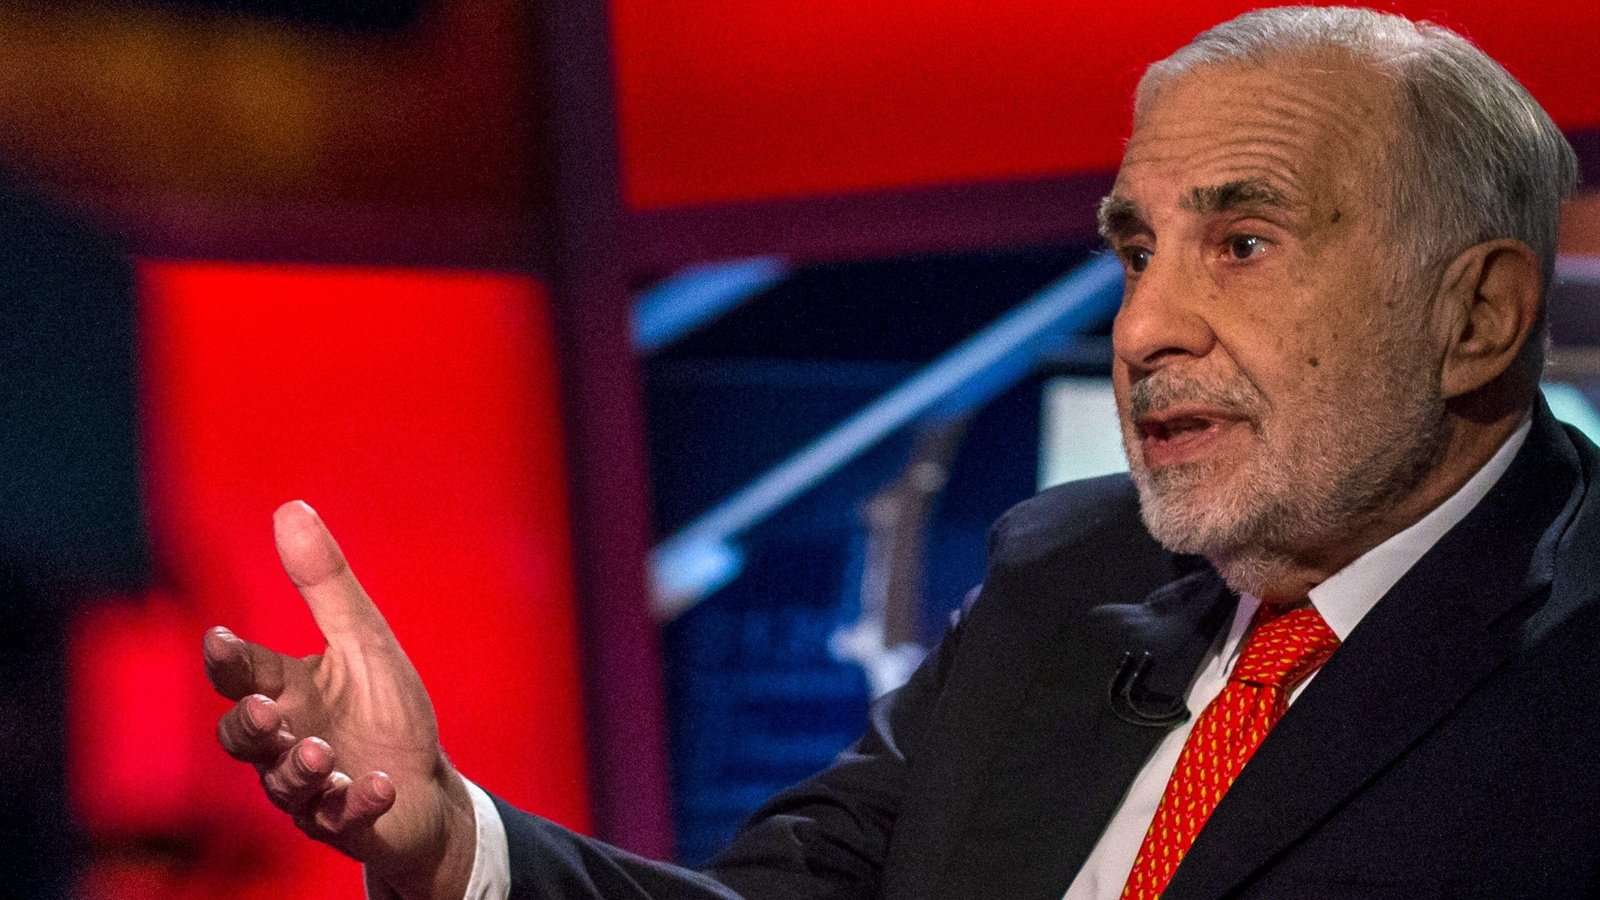 Billionaire activist investor Carl Icahn gives an interview on FOX Business Network's Neil Cavuto show in New York February 11, 2014